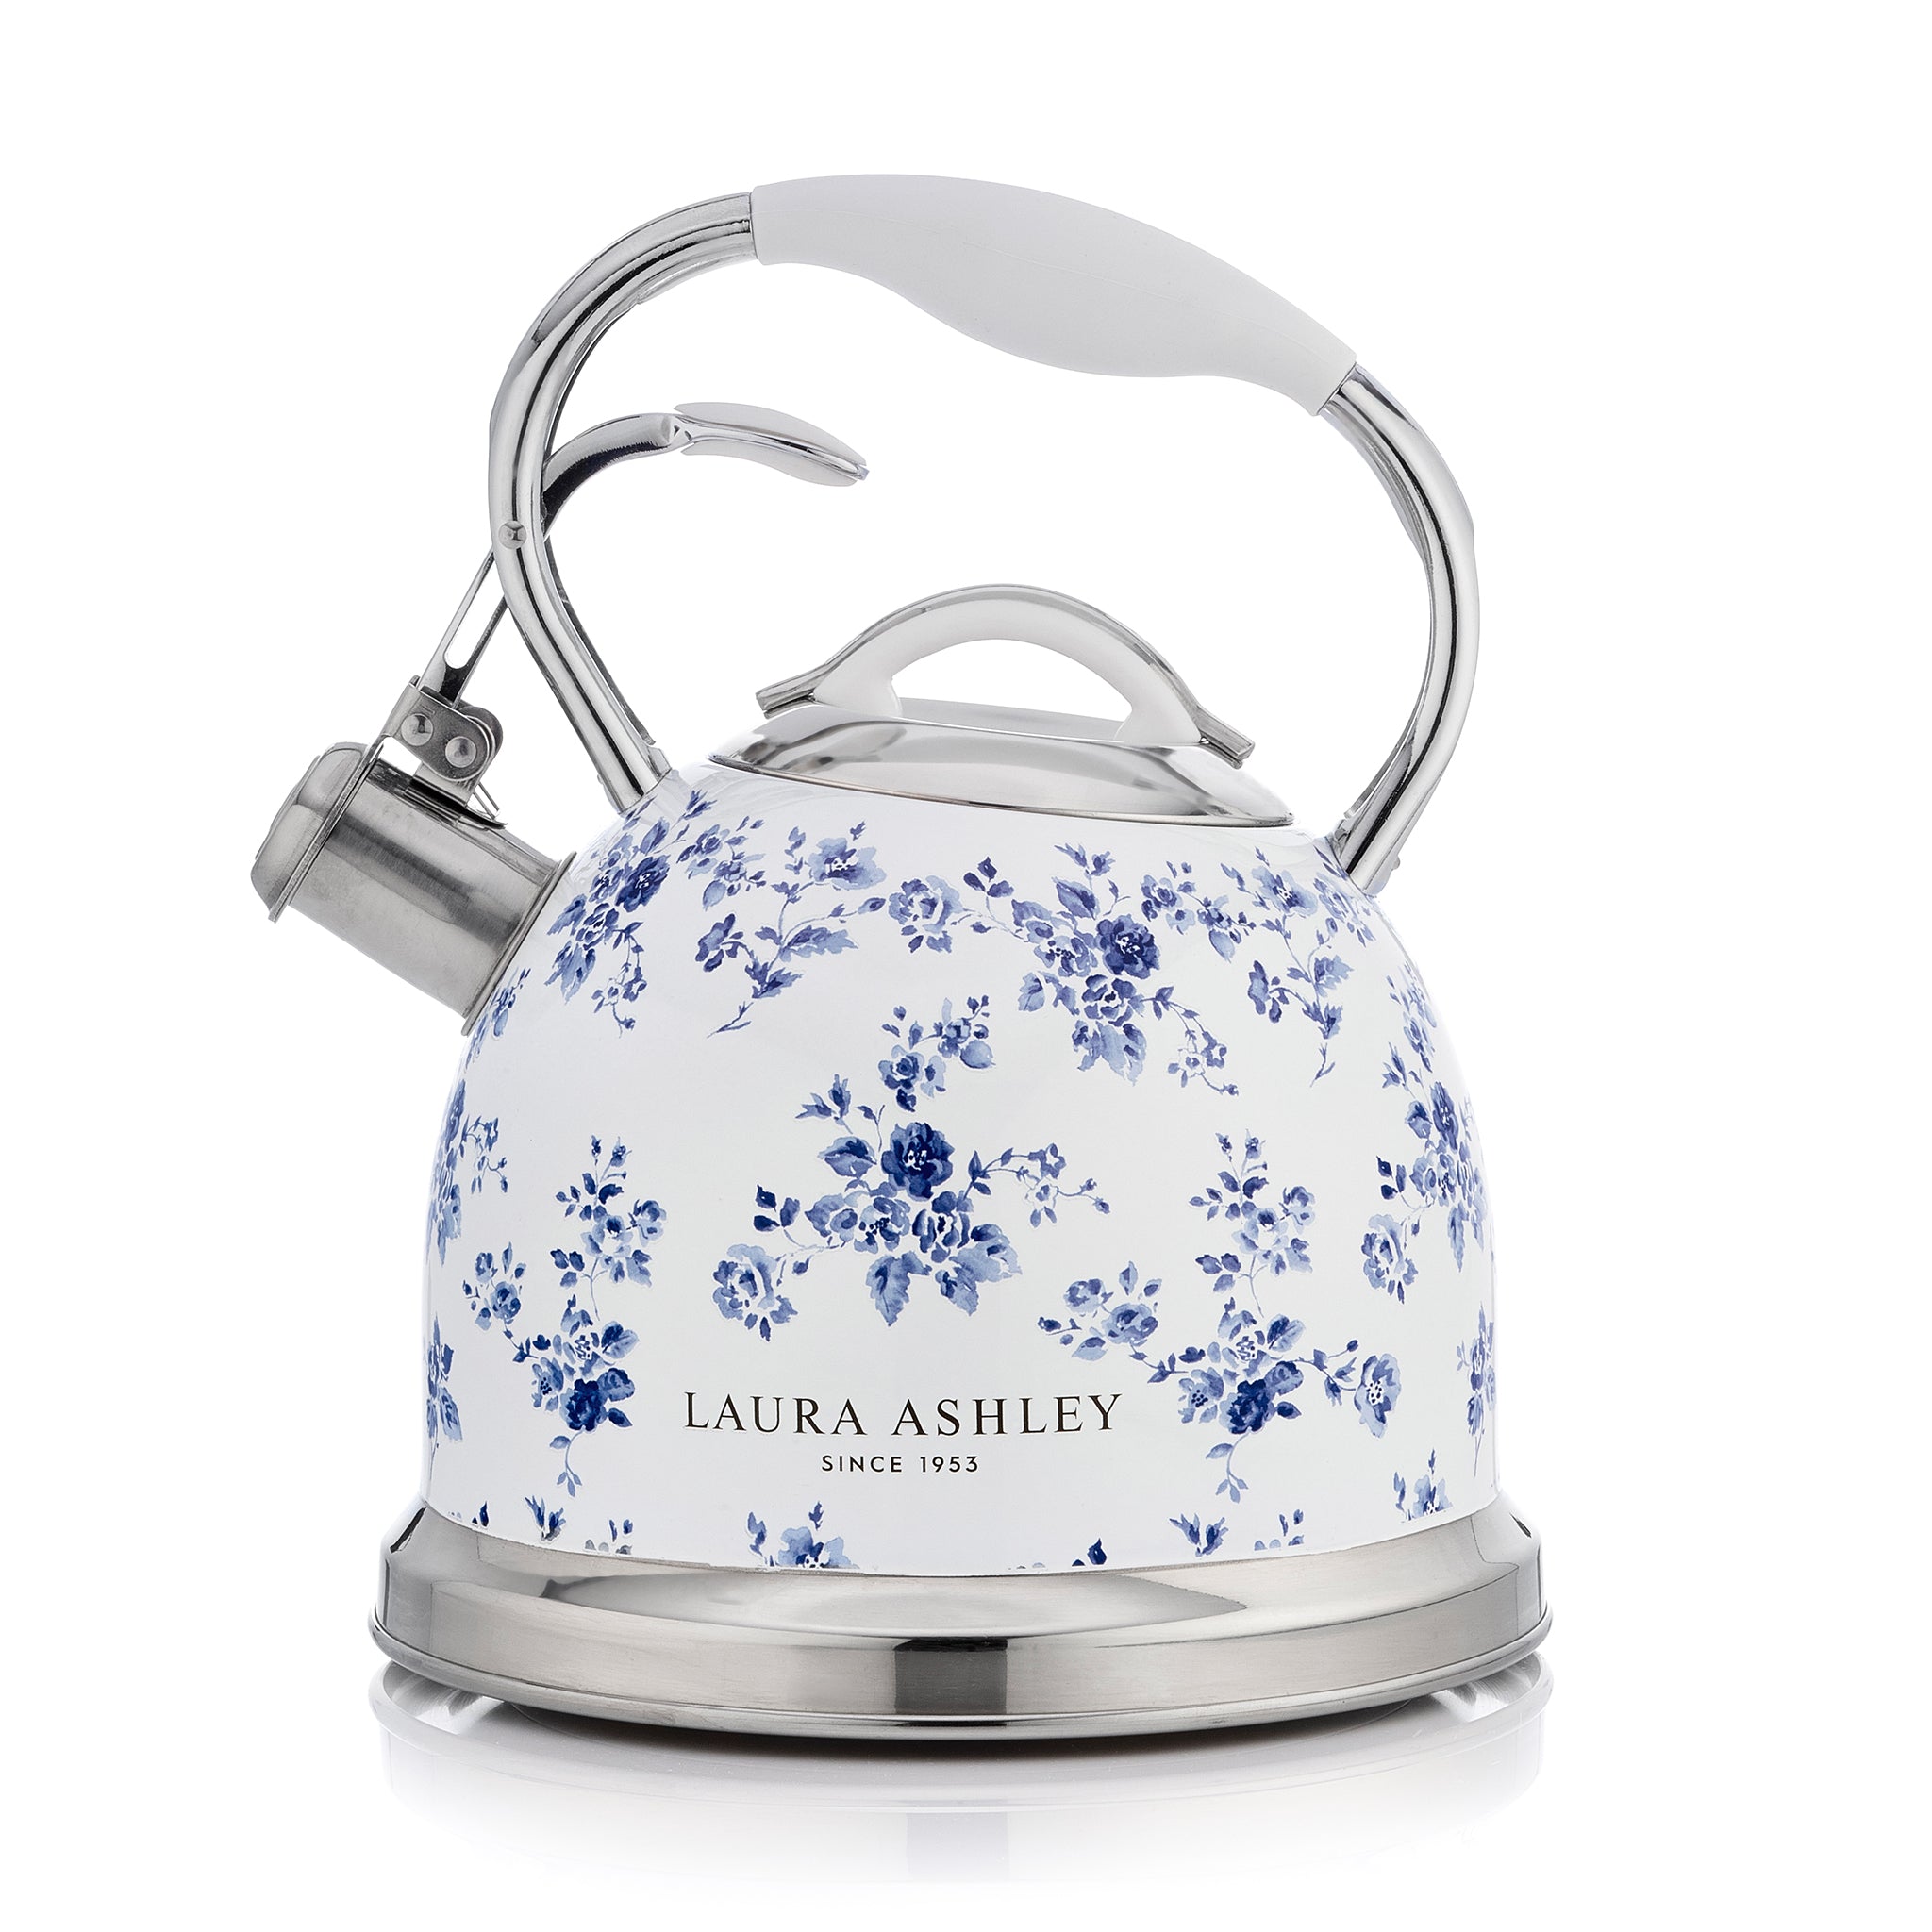 Laura Ashley – Stove Top Kettle